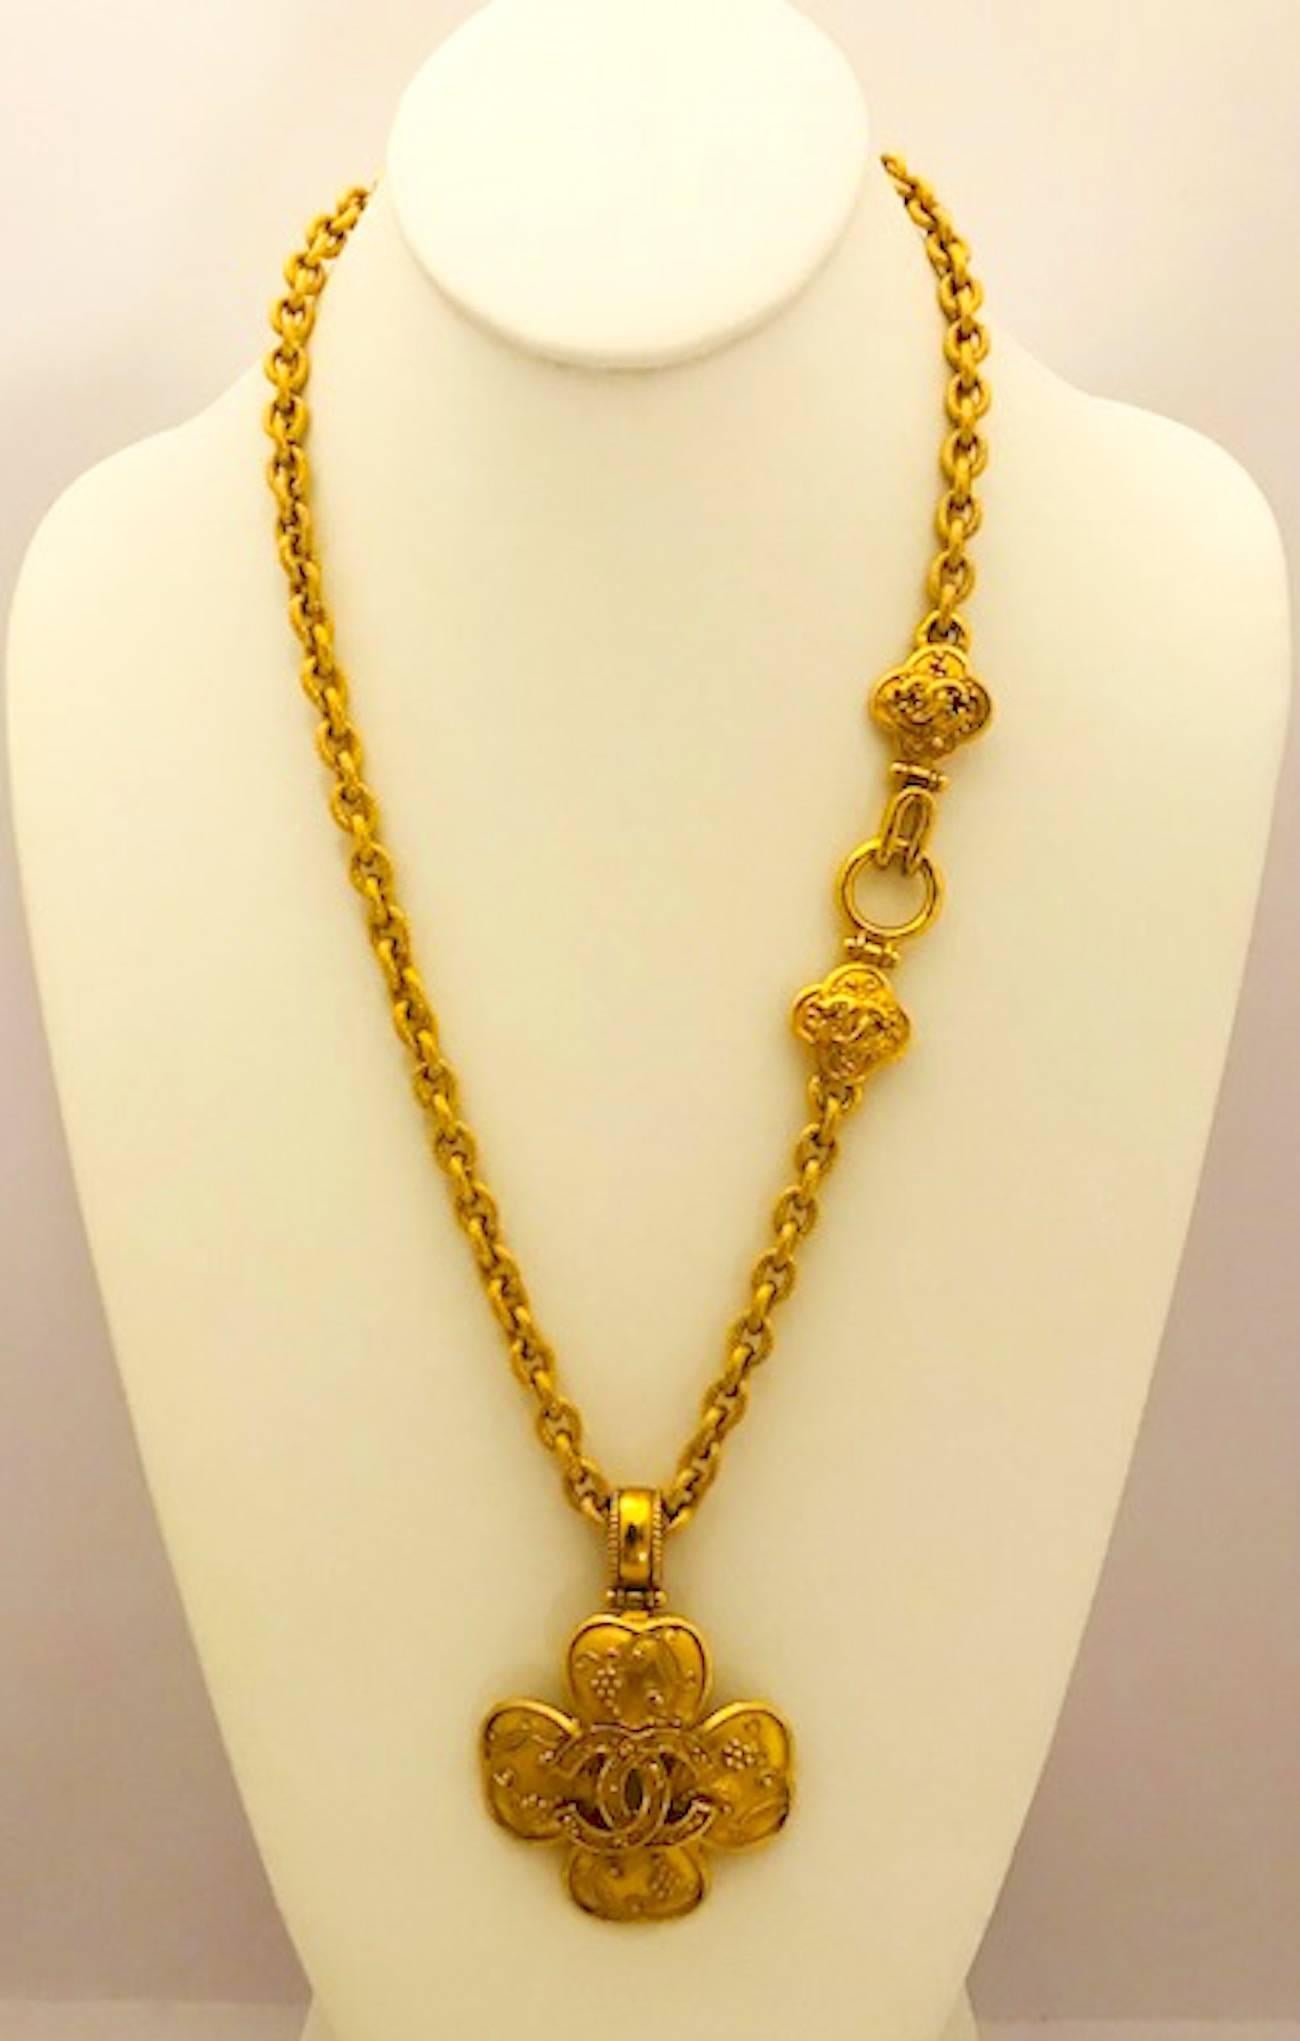 A lovely and detailed Chanel pendant necklace from the Autumn 1996 collection. The necklace features a 2